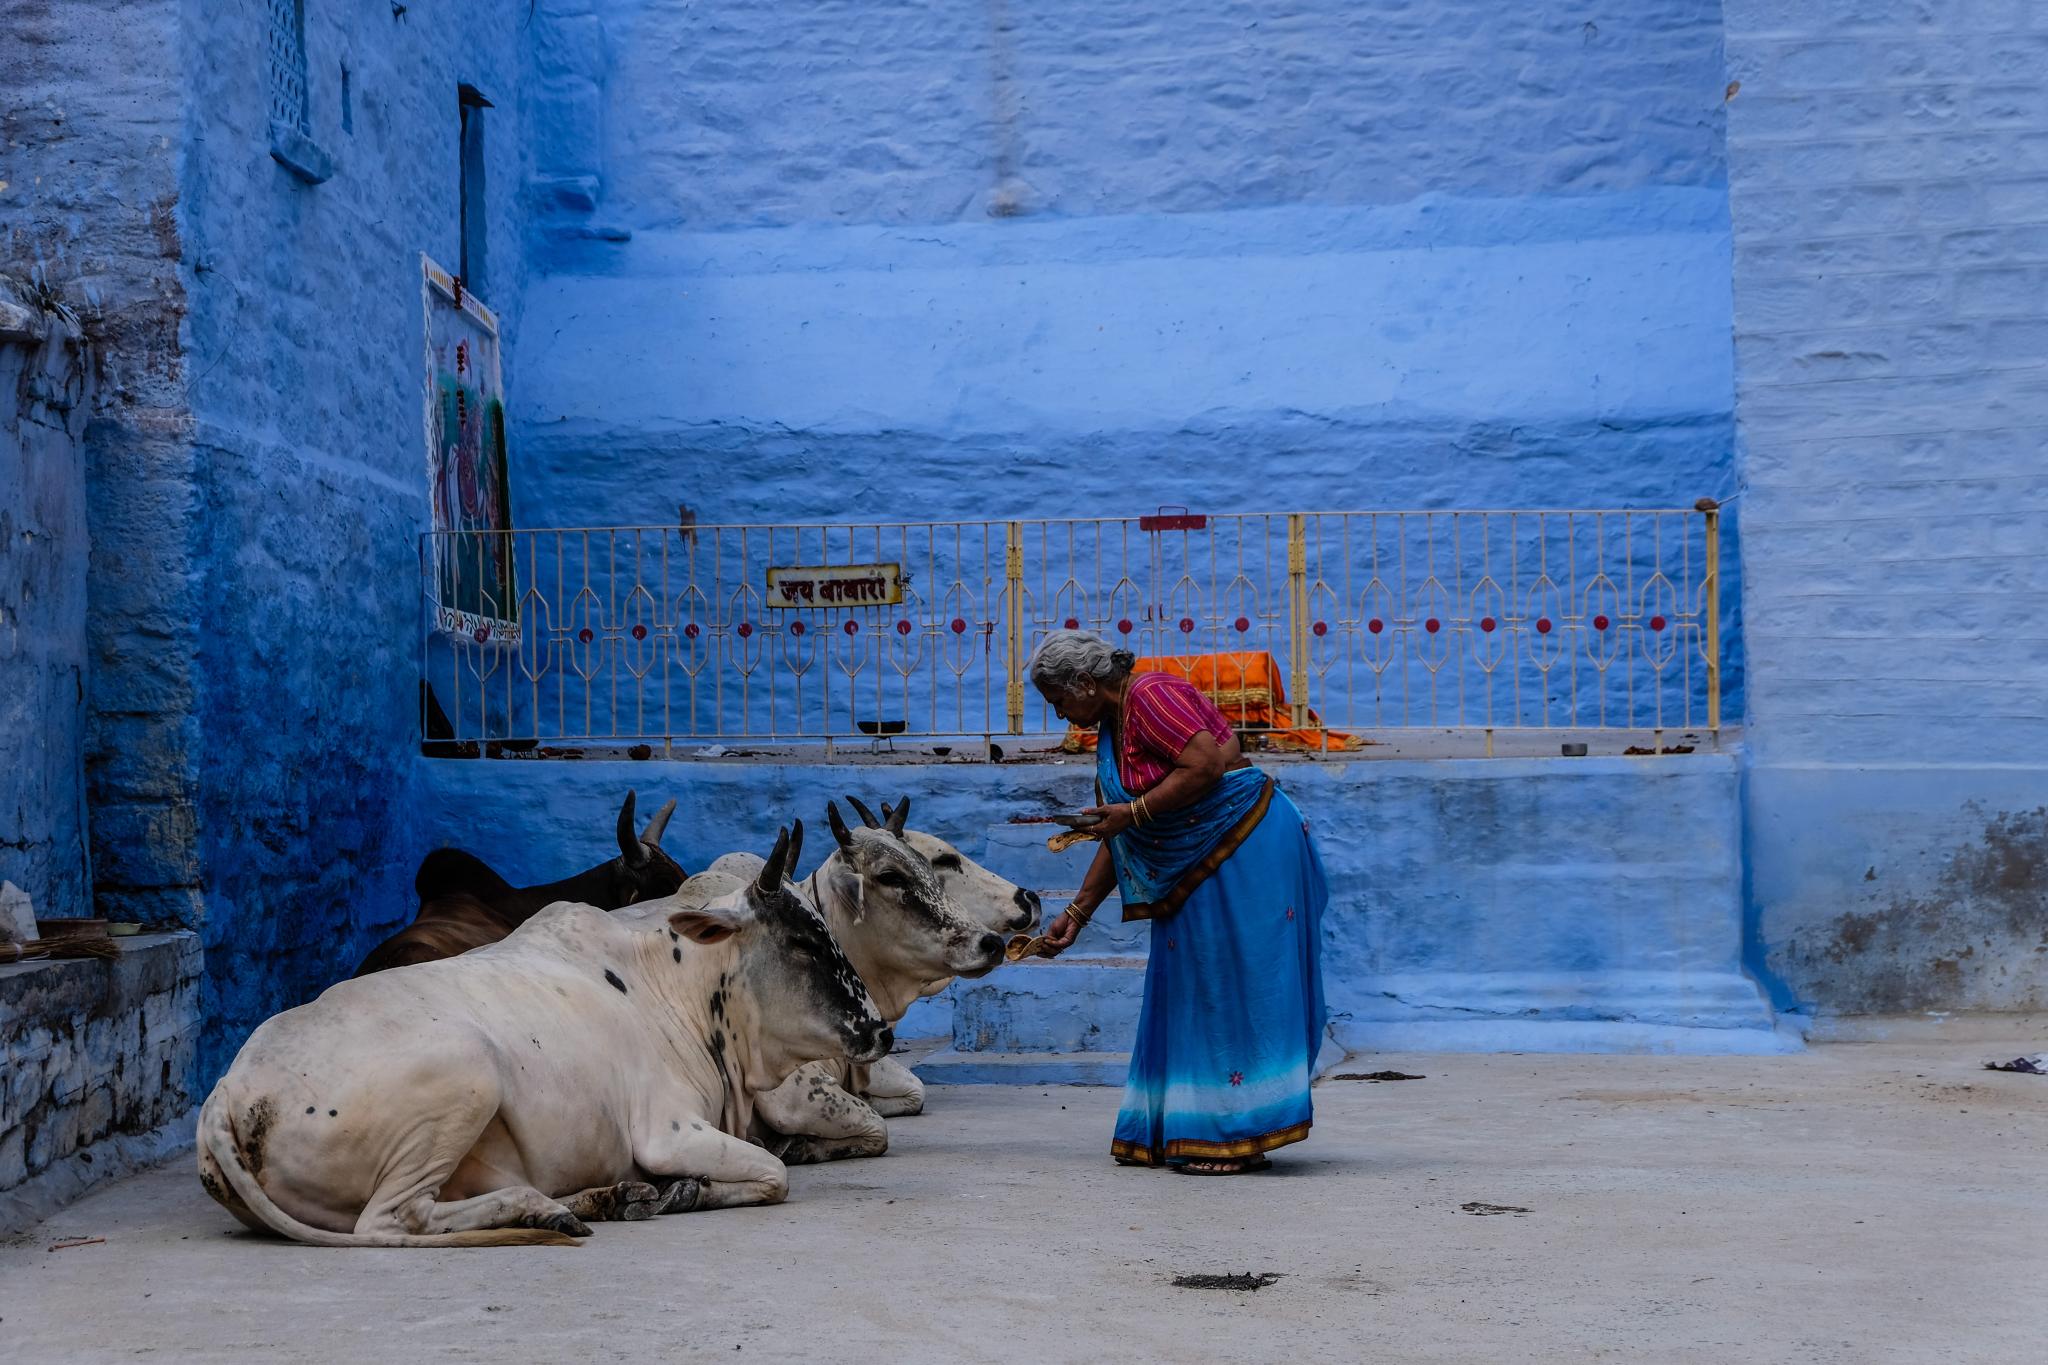 Indian woman with a cow and blue wall